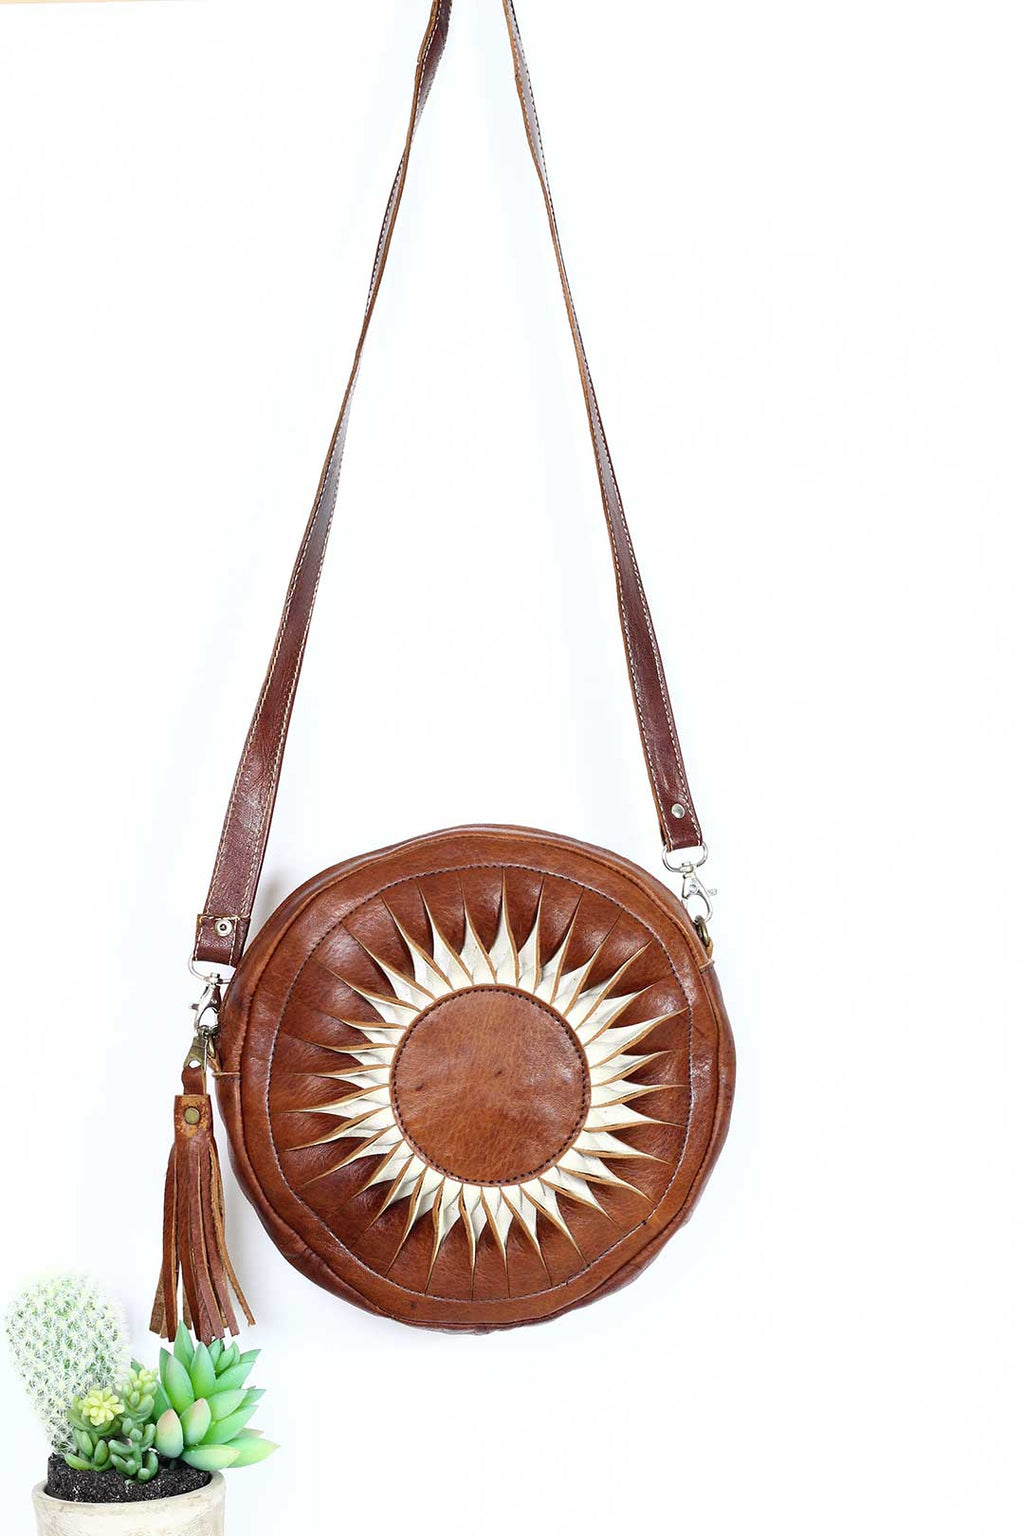 BROWN WOVEN LEATHER TOTE BAG  MOROCCANSWAY – MoroccansWay